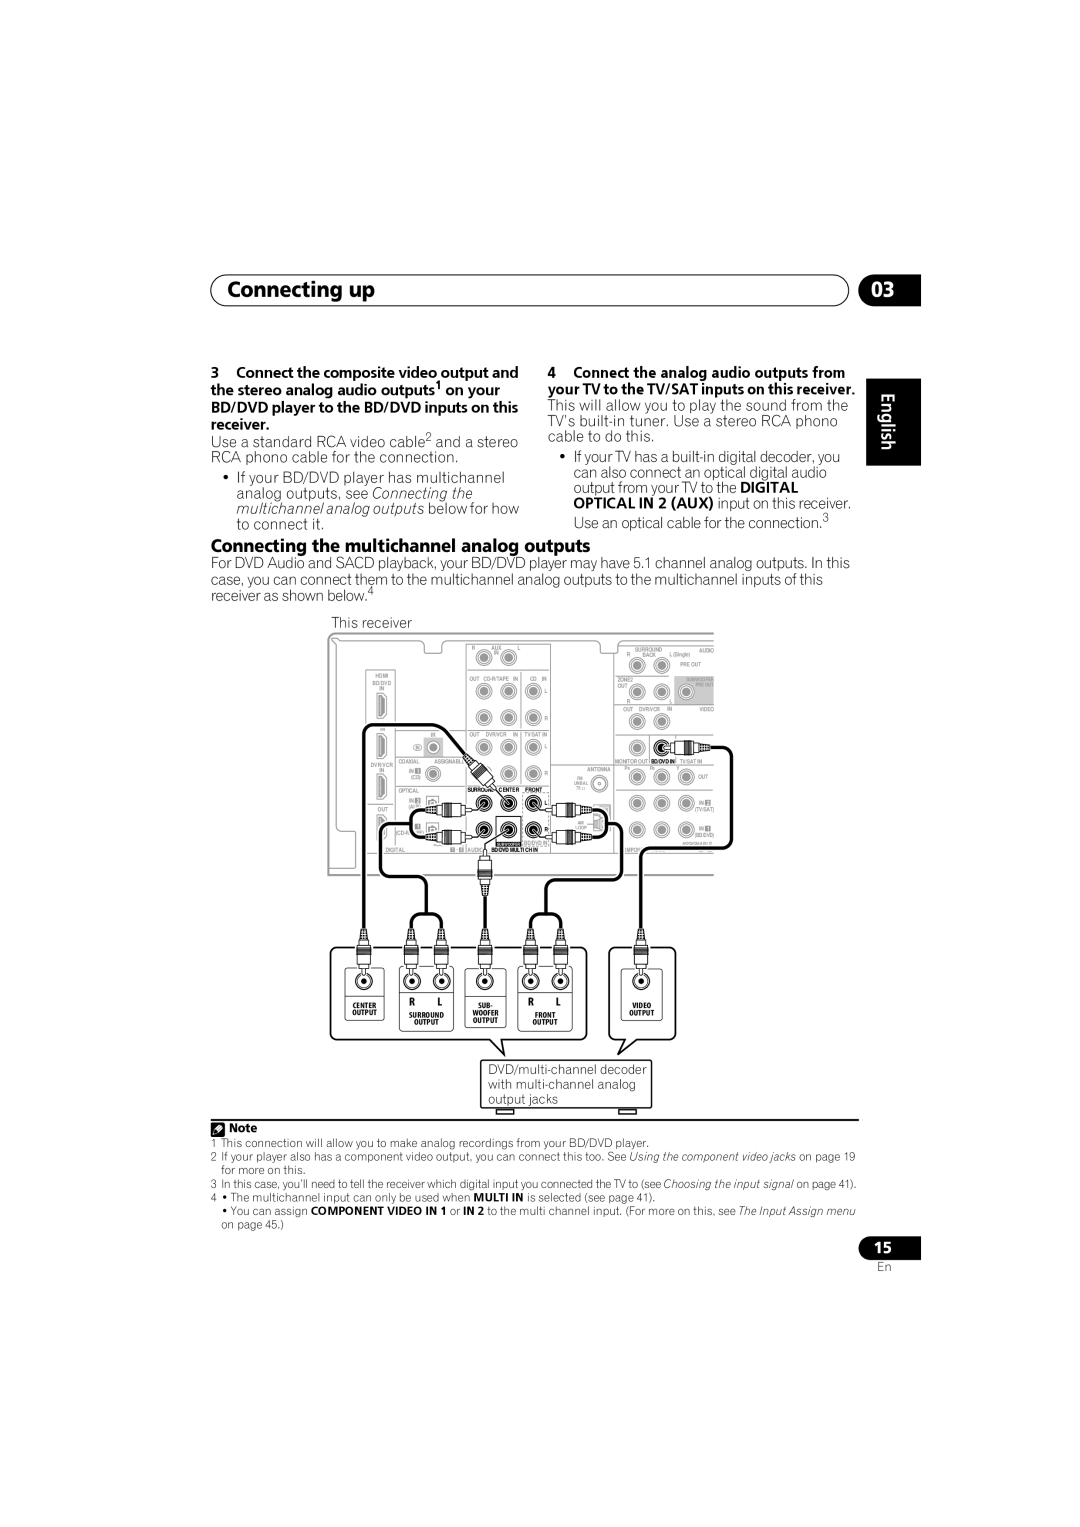 Pioneer VSX-819H-S manual Connecting the multichannel analog outputs, Español Deutsch 15, Connecting up, English Français 